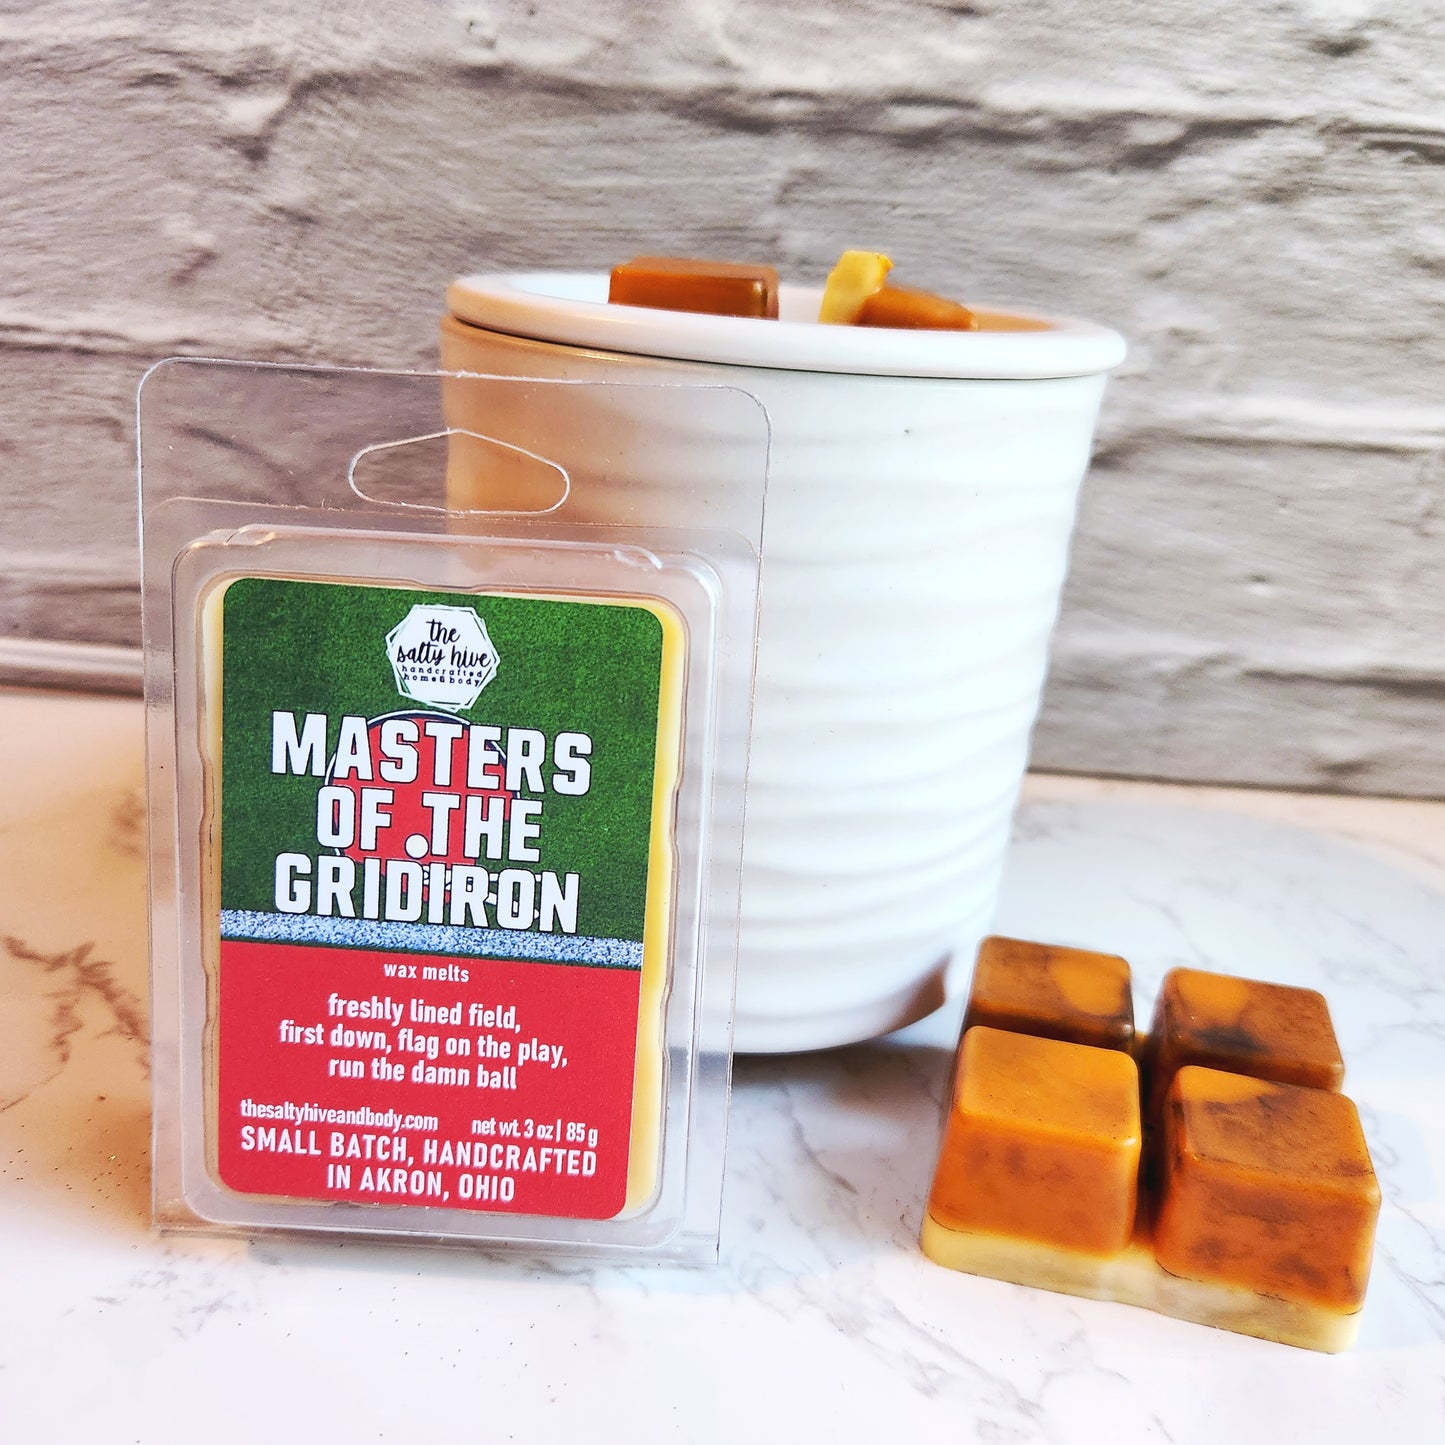 masters of the gridiron wax melts - the salty hive